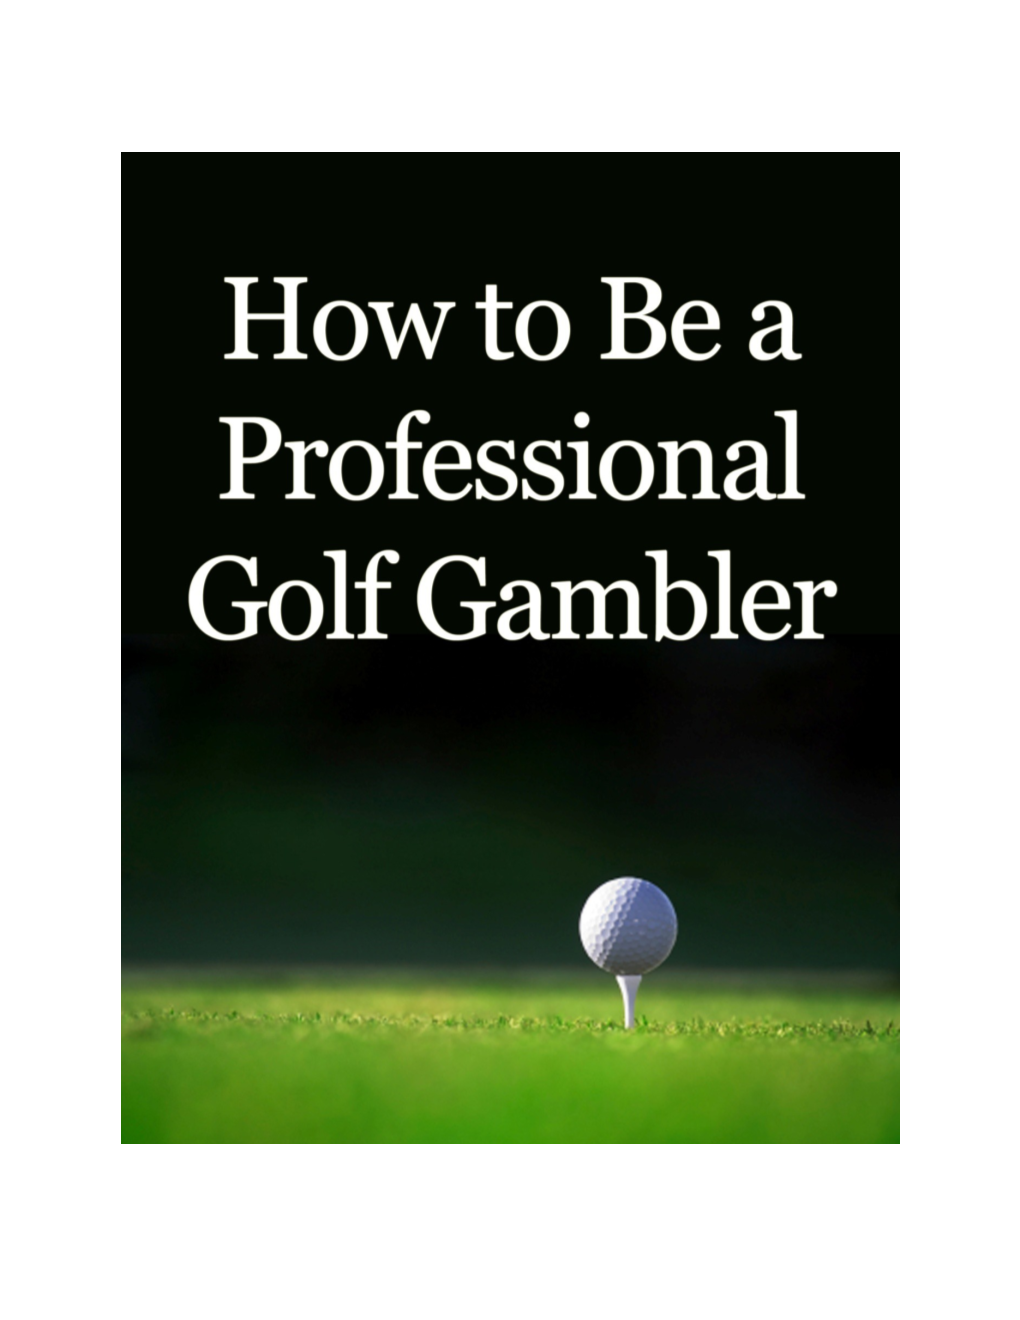 How to Gamble on Golf